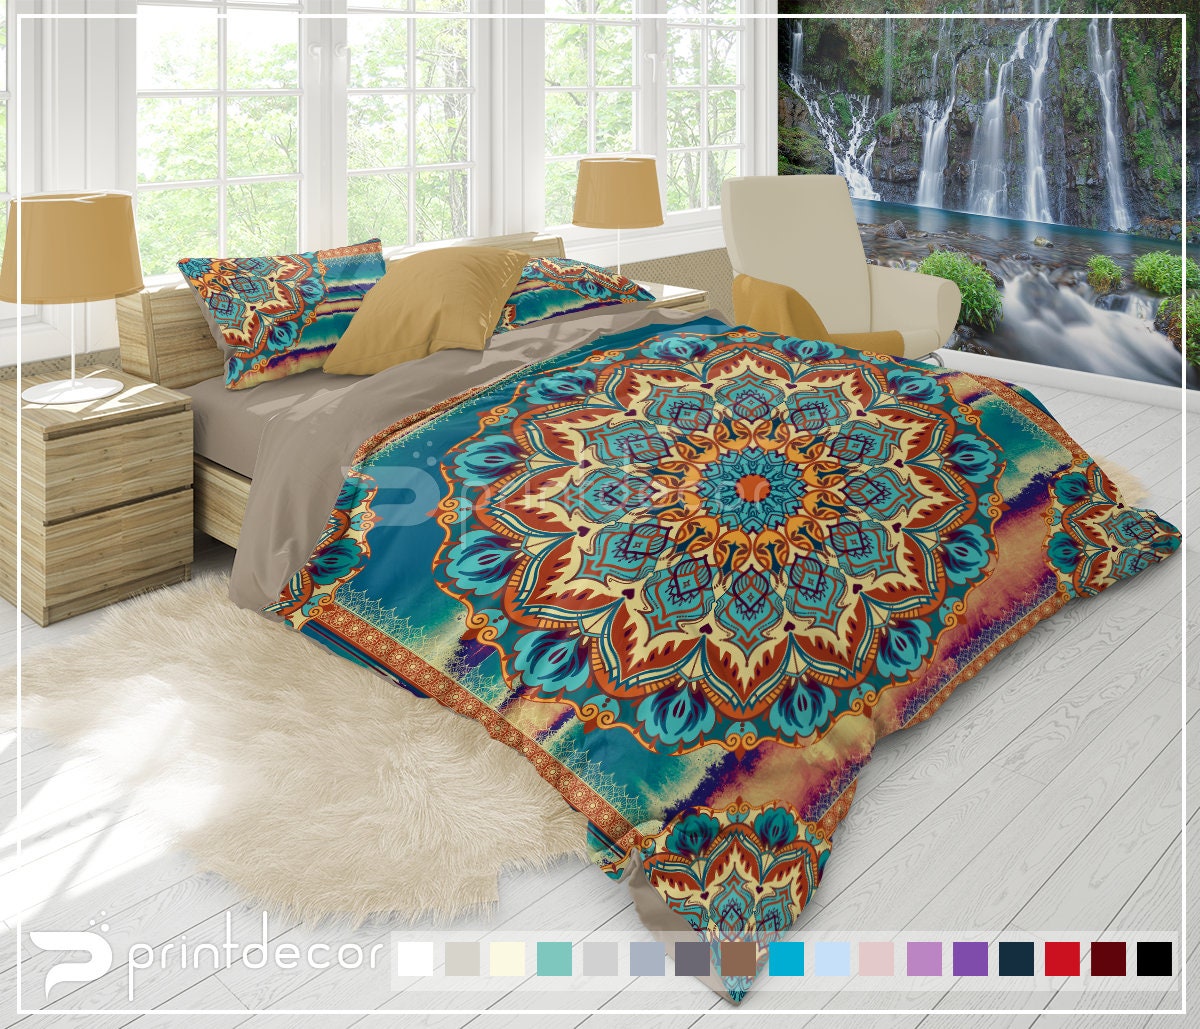 Decorative Mandala Bed Cover Sheet Indian Hippie Bohemian Queen Tapestry Throw 